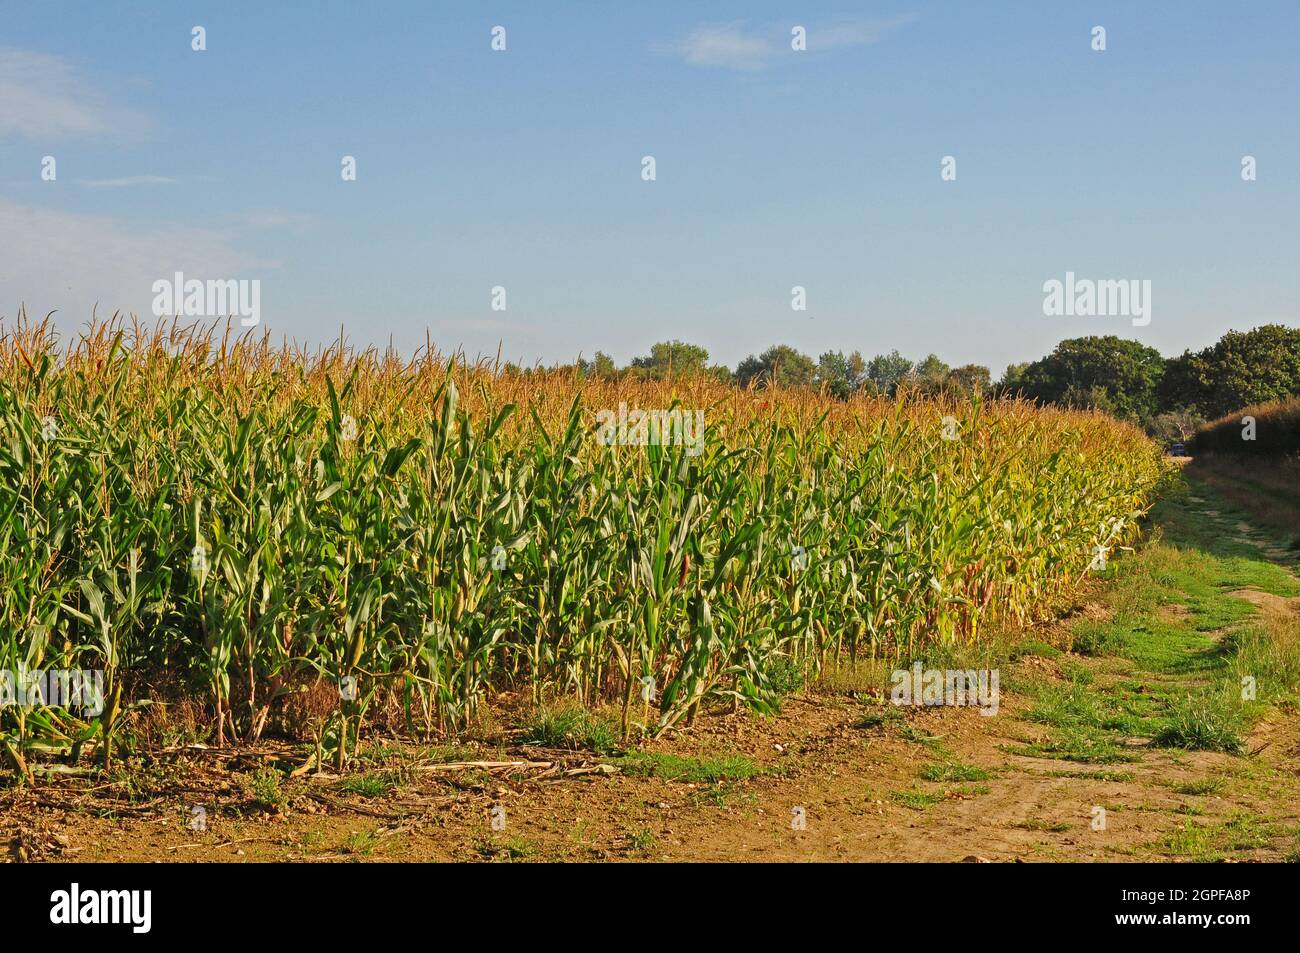 farm track / footpath next to filed of ripening maize, grown for cattle feed. Stock Photo